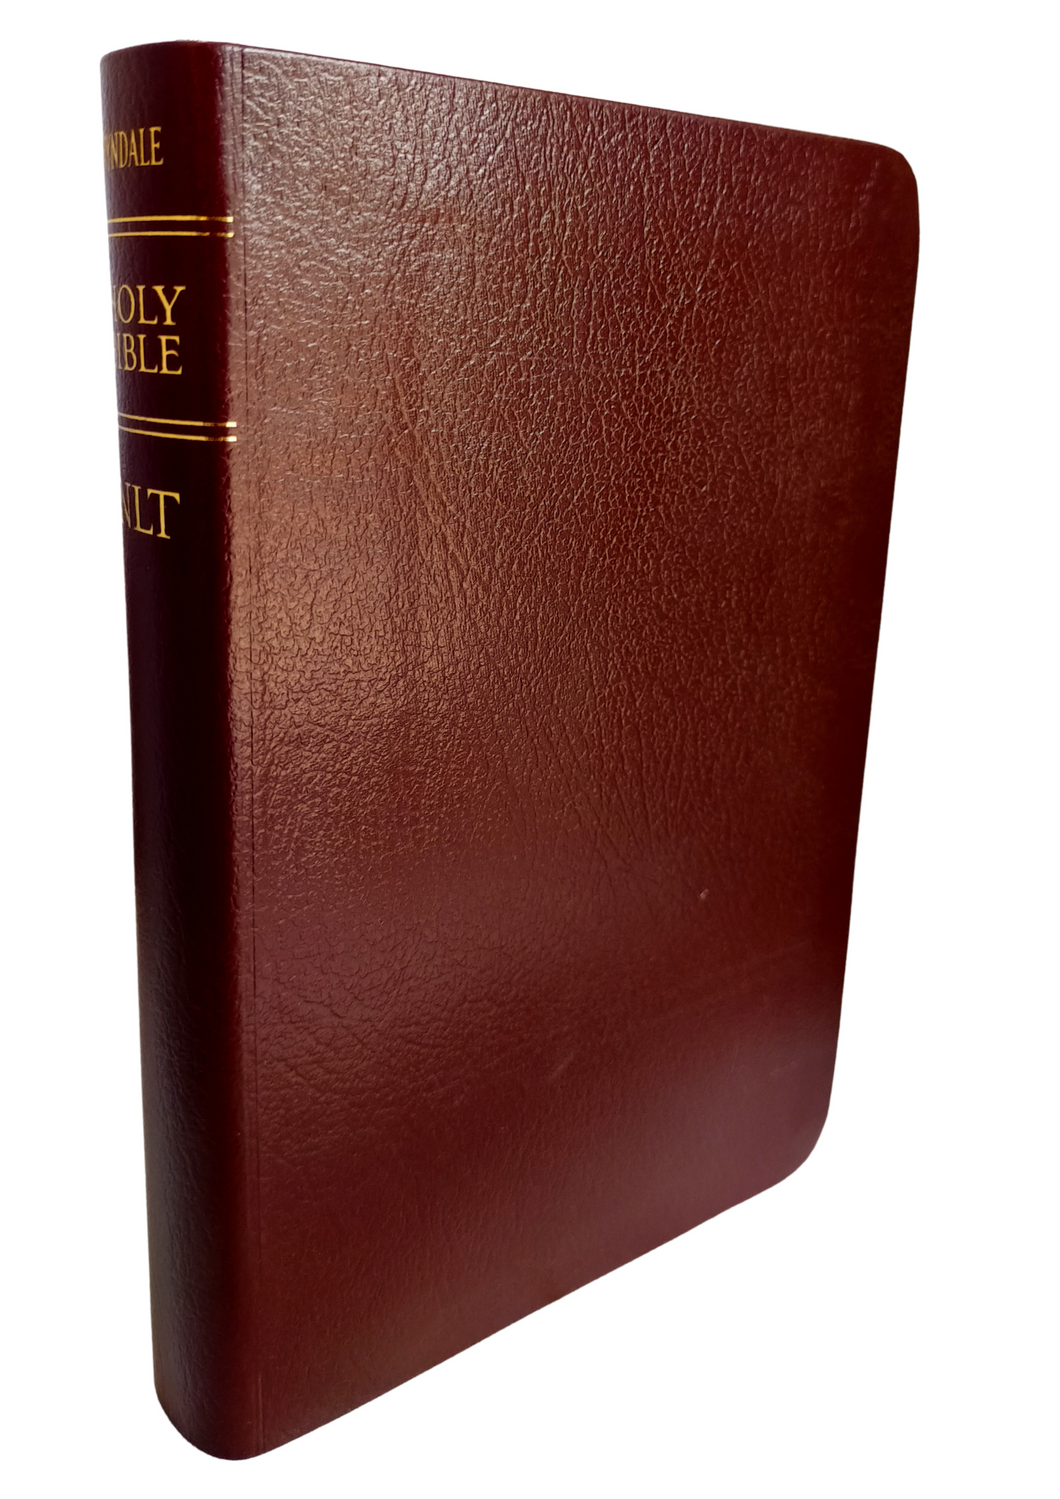 Compact Gift Bible New Living Translation (NLT) (Bonded Leather, Burgundy/maroon) Bonded Leather